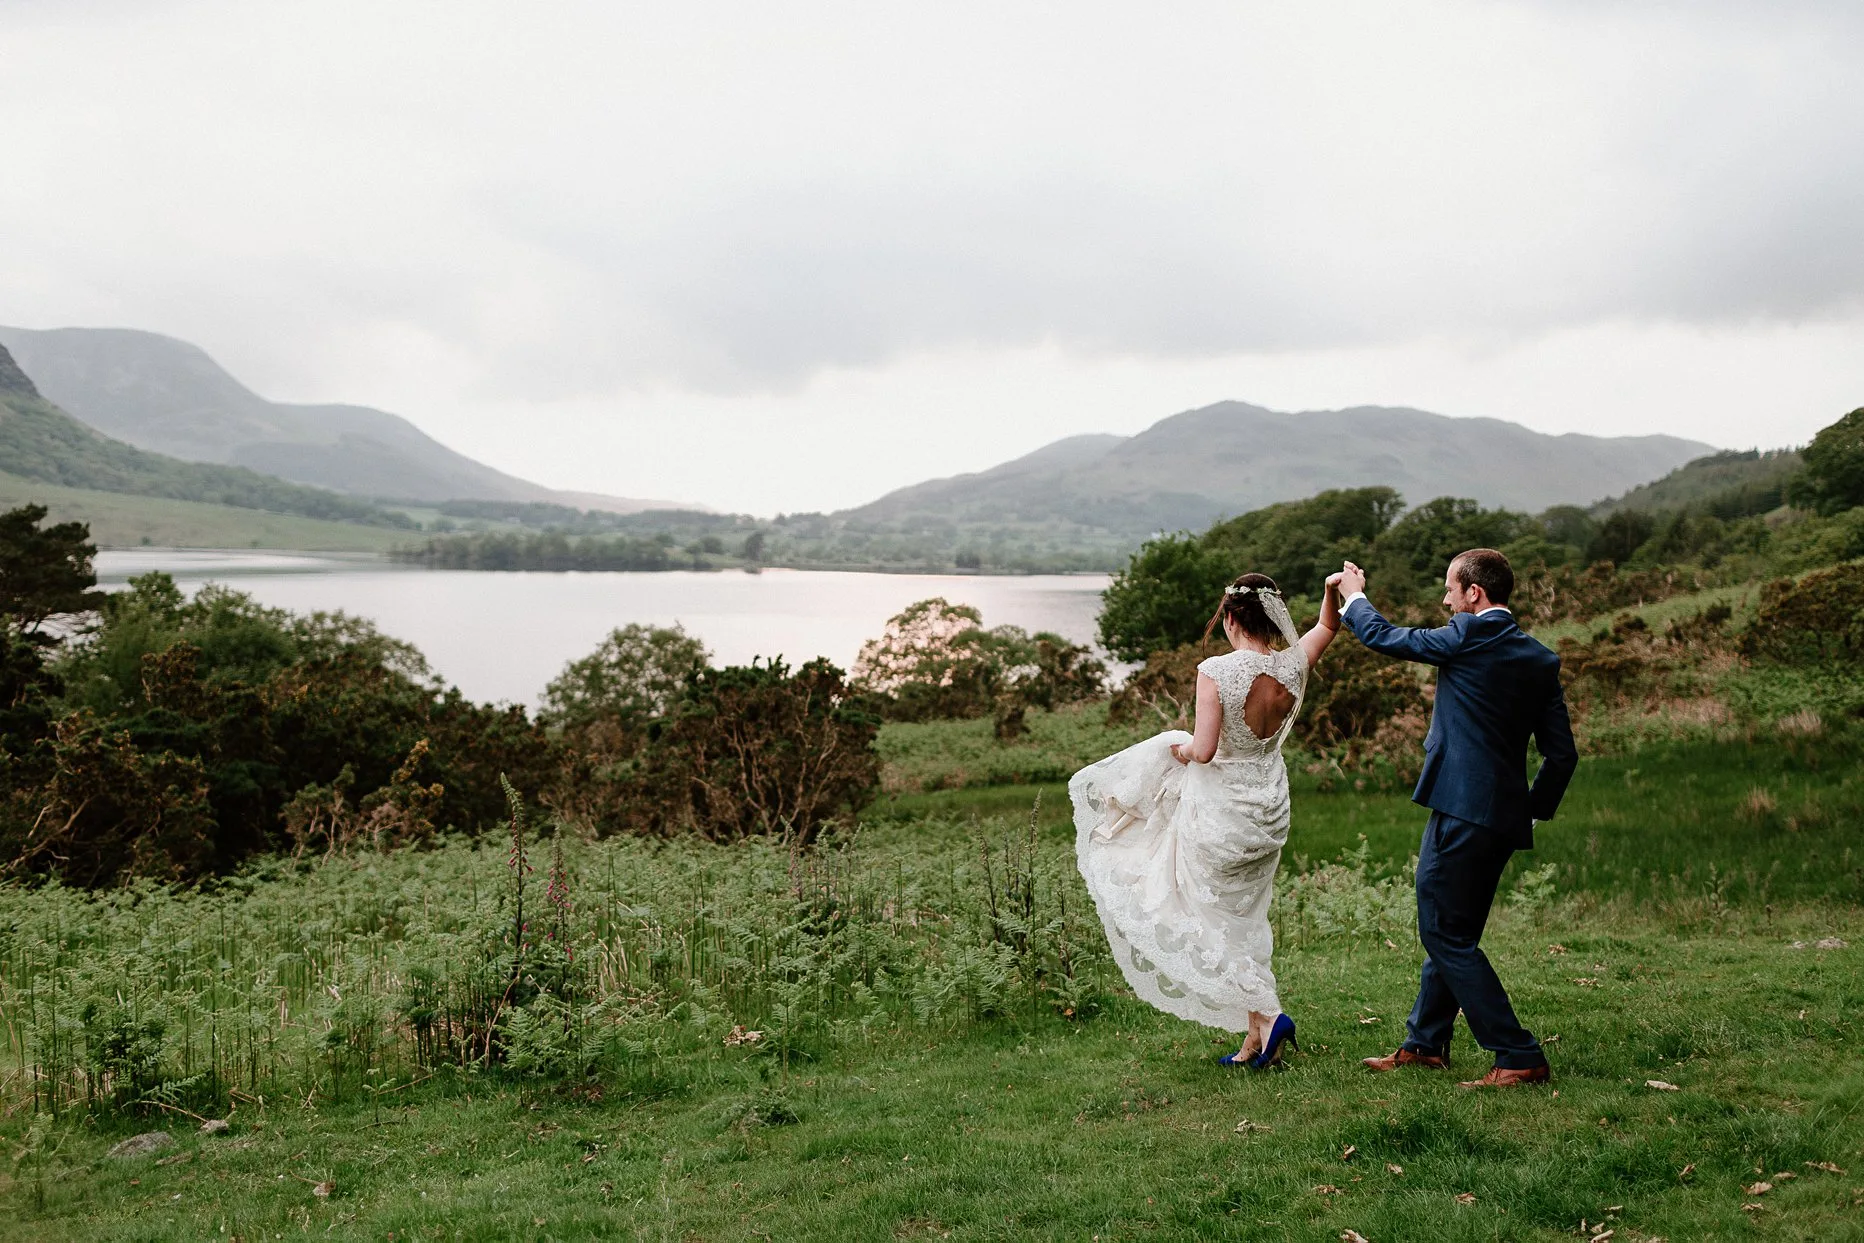 Bride and groom dancing on a hill overlooking Crummock Water in the Lake District. Groom is spinning the bride around.